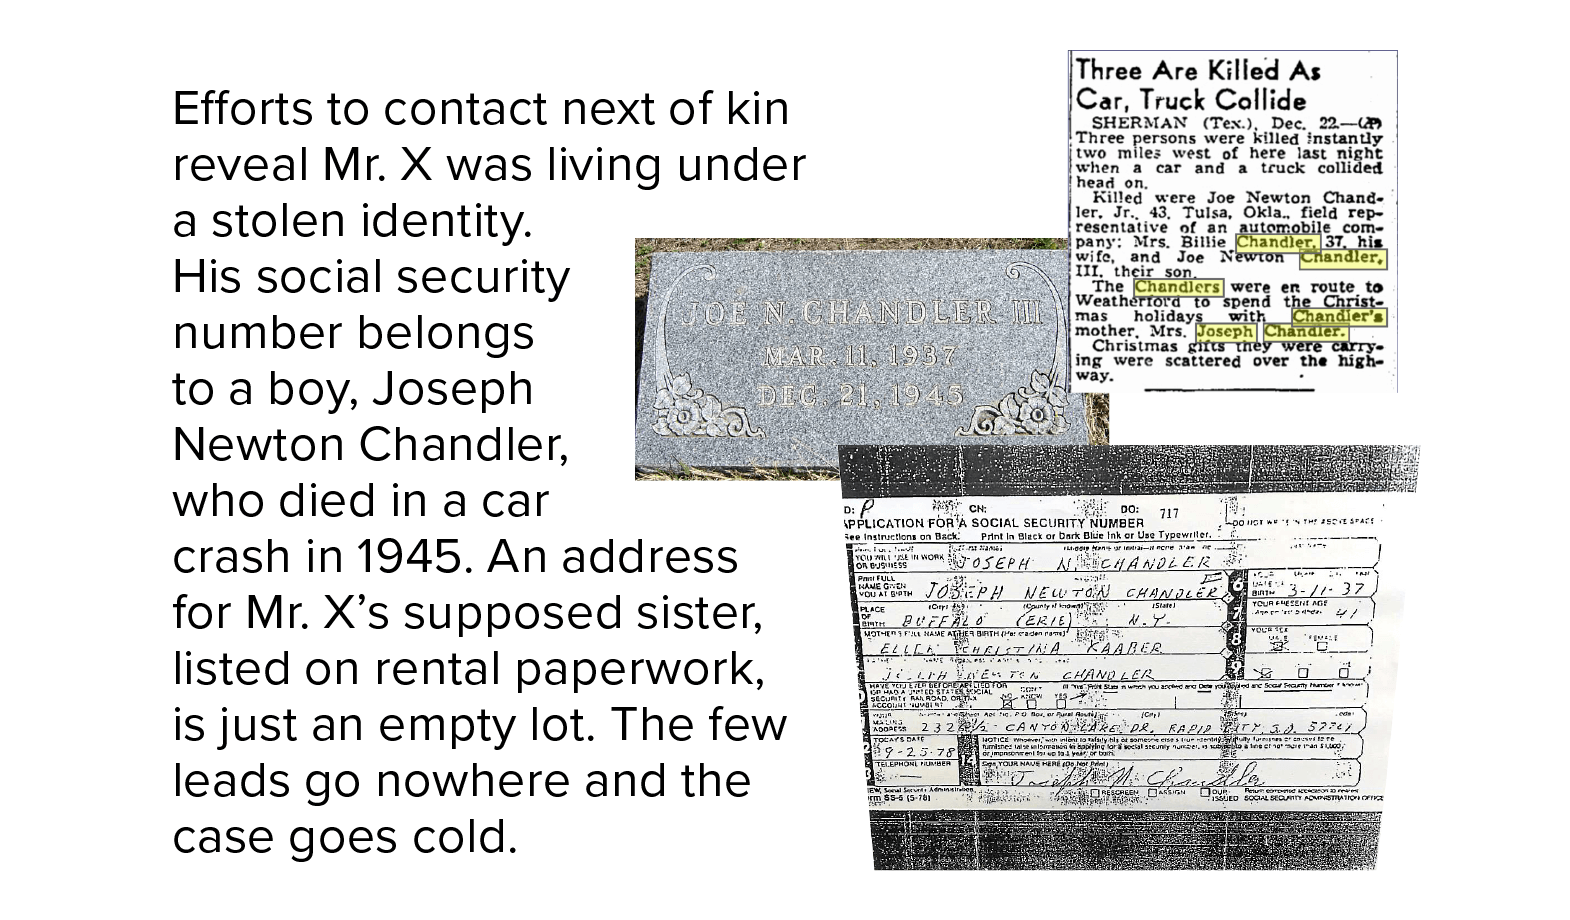 Efforts to contact next of kin reveal Mr. X was living under a stolen identity. His social security number belongs to a boy, Joseph Newton Chandler, who died in a car crash in 1945. An address for Mr. X’s supposed sister, listed on rental paperwork, is just an empty lot. The few leads go nowhere, and the case goes cold.